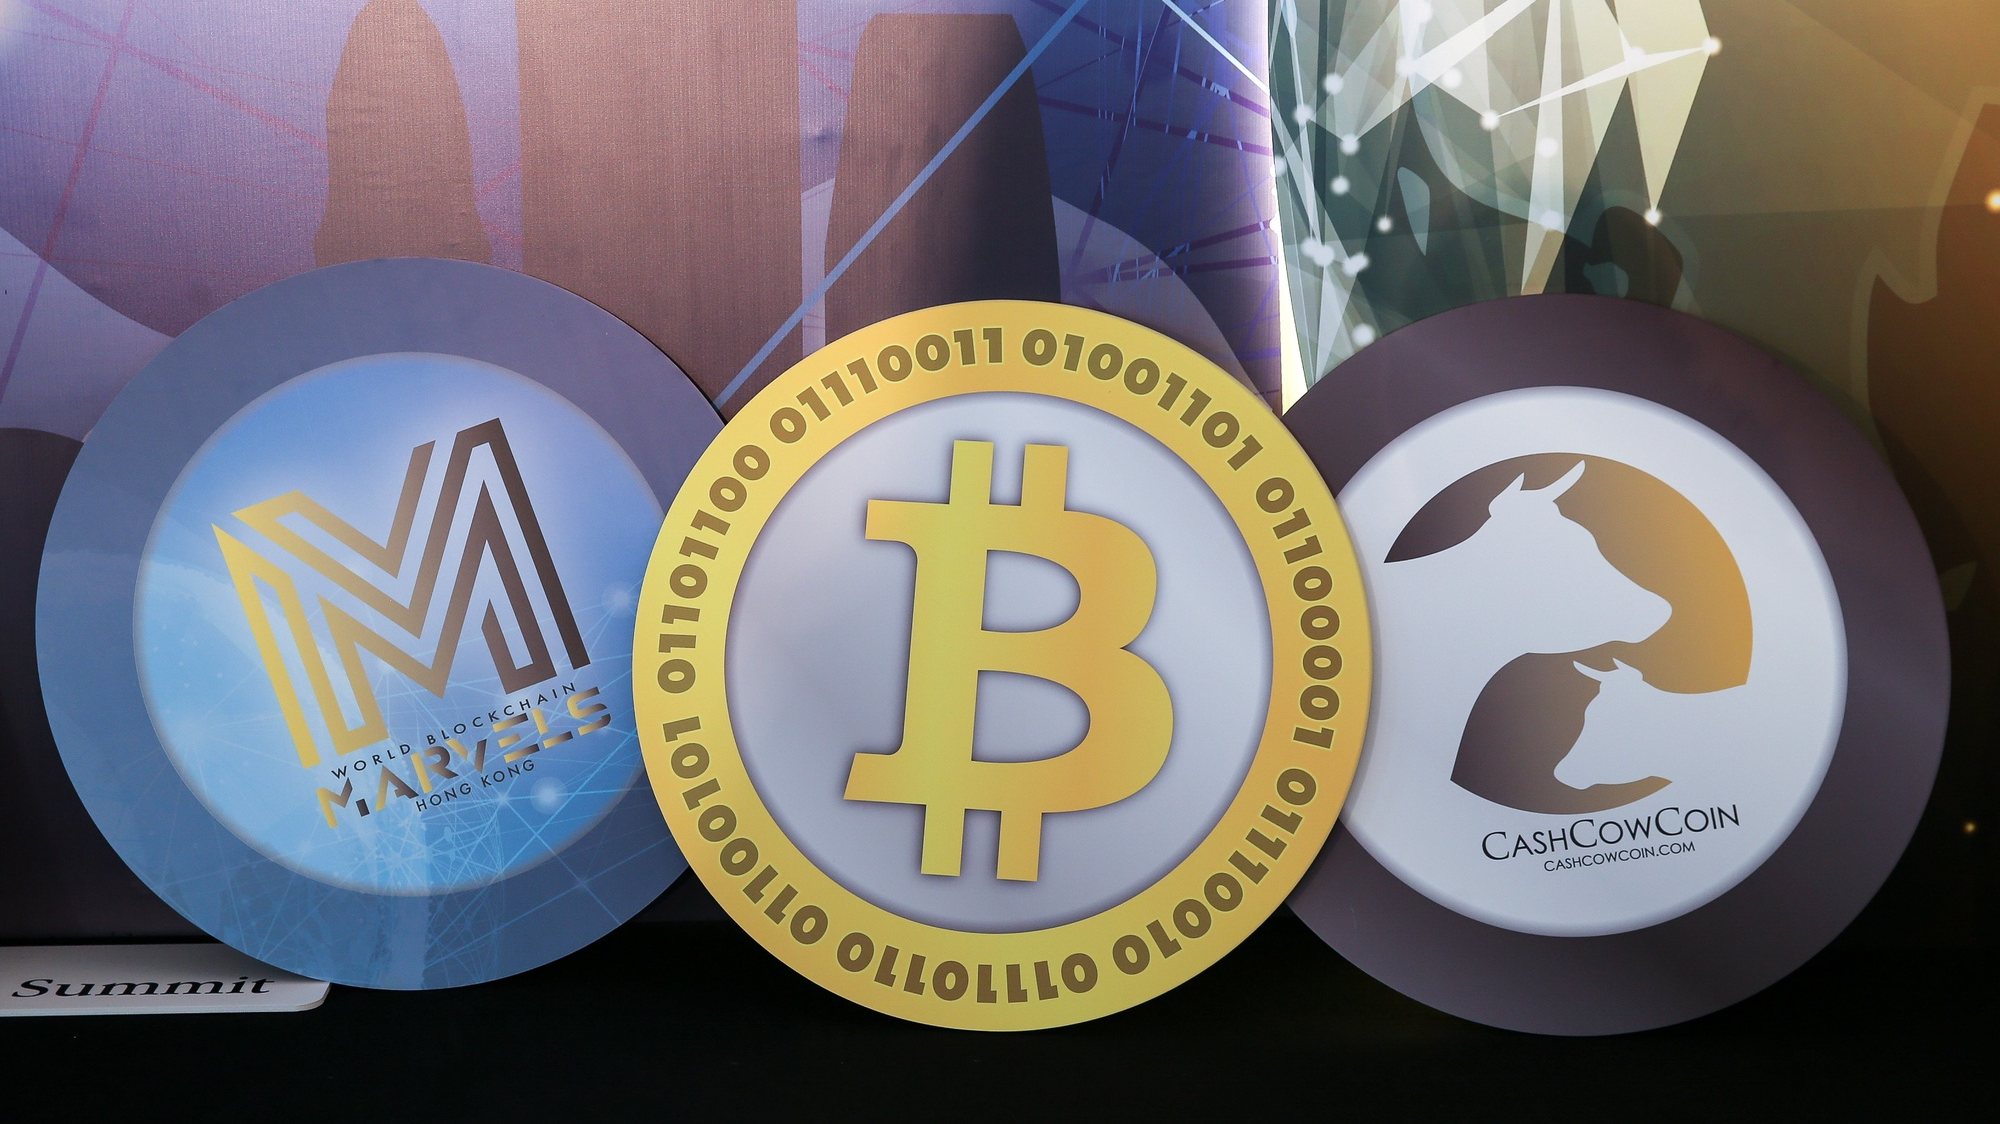 epa09485704 (FILE) - Logos of (L-R) the World Blockchain Marvels, and cryptocurrencies Bitcoin, and CashCowCoin are displayed during the World Blockchain Marvels in Hong Kong, China, 24 August 2018 (reissued 24 September 2021). China&#039;s People&#039;s Bank on 24 September 2021 in a statement said that &quot;Virtual currency-related business activities are illegal financial activities.&quot;  EPA/JEROME FAVRE *** Local Caption *** 54572171